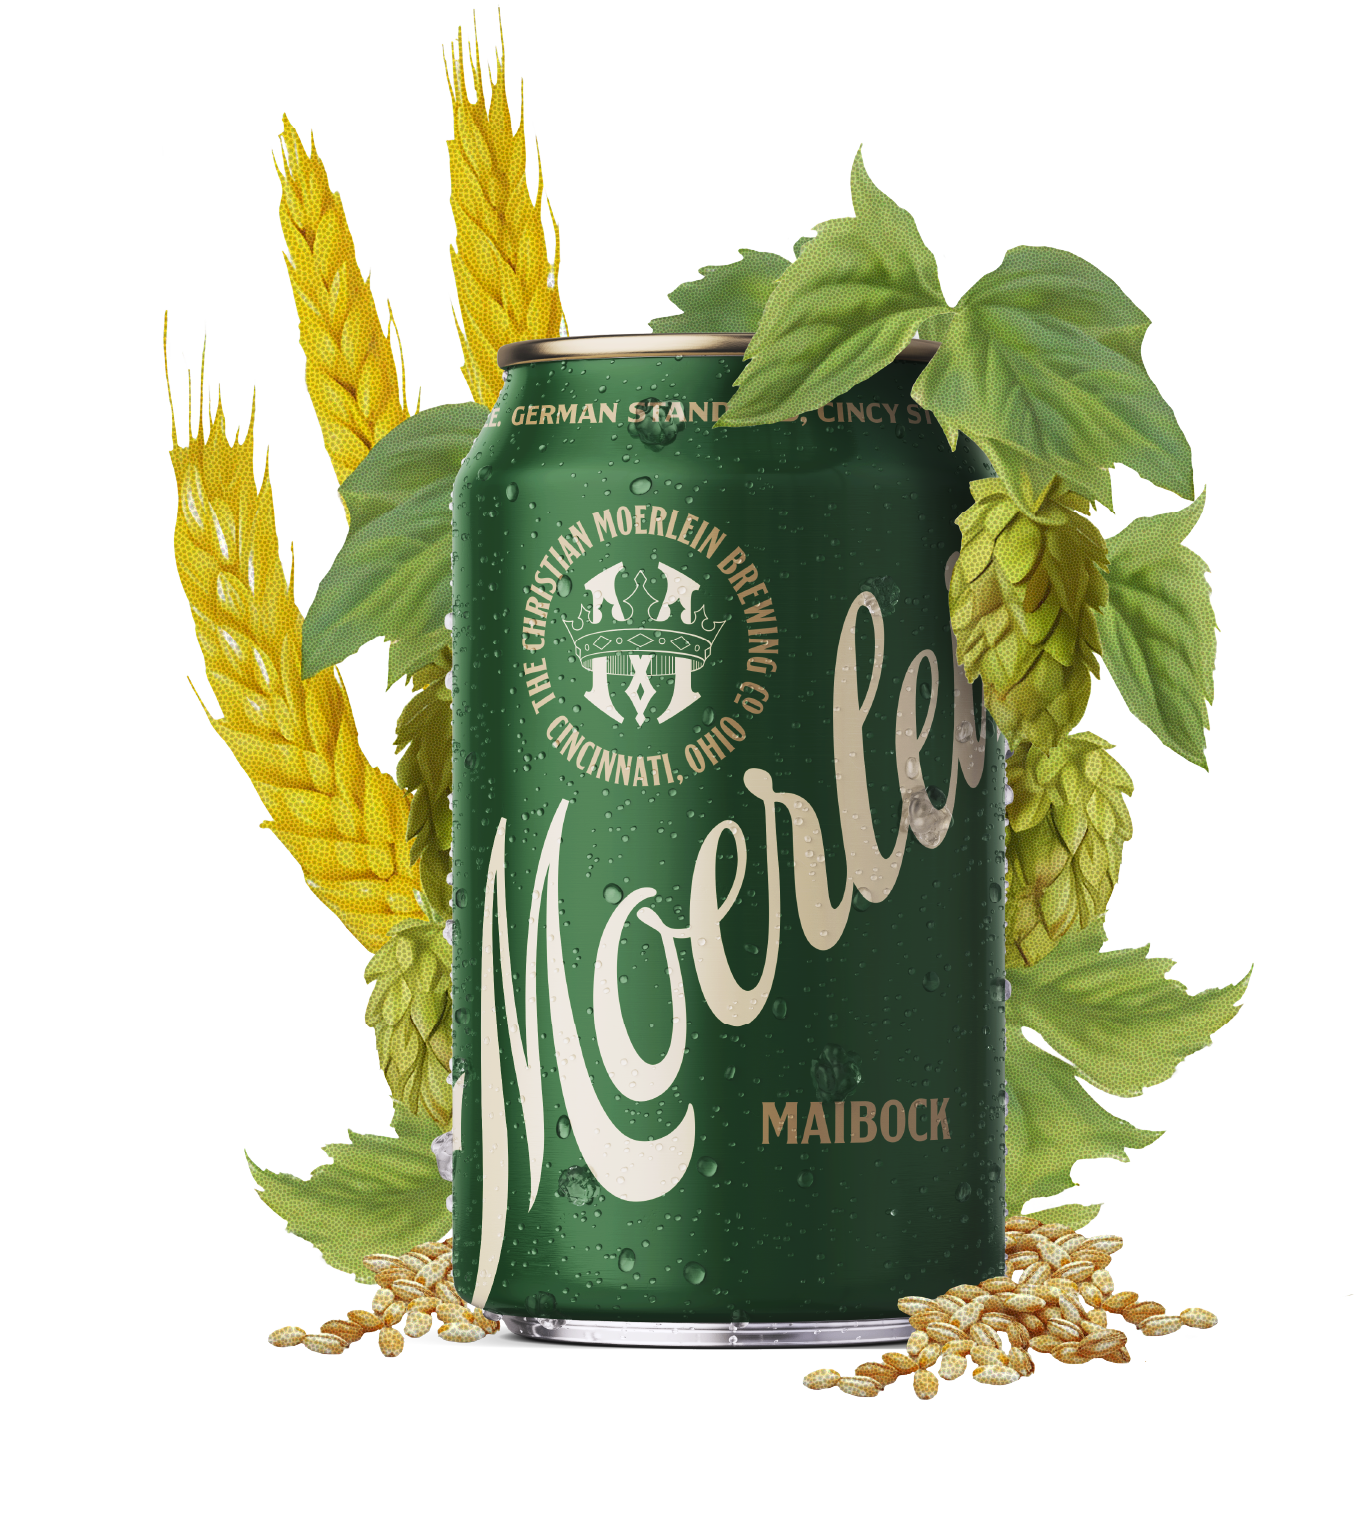 Moerlein Maibock Can nestled in a wreath of hops and malted barley.